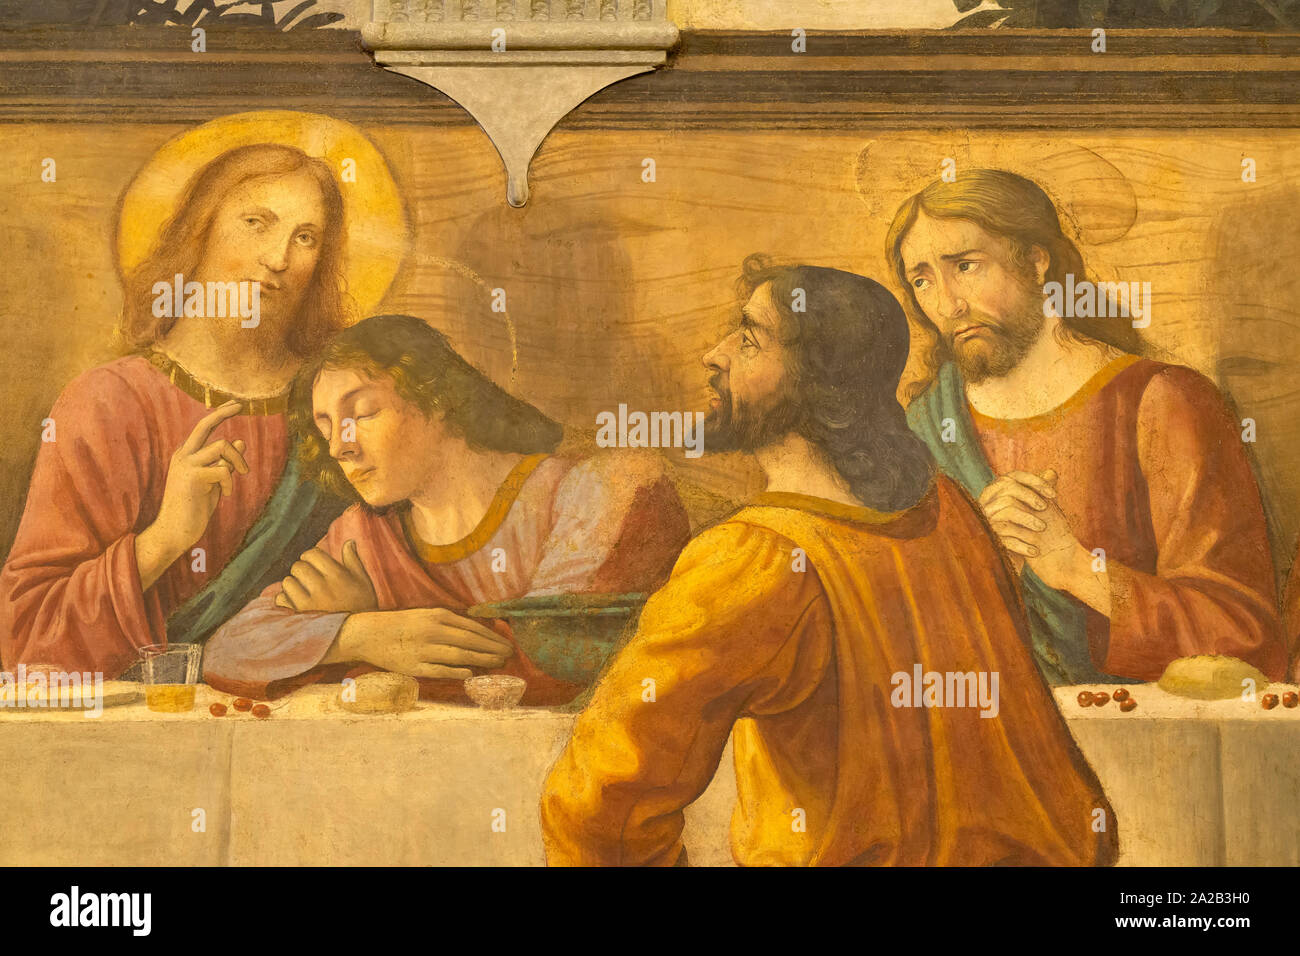 Last Supper, detail, fresco, Domenico Ghirlandaio, 1480, refectory, Convent of the Ognissanti,  Florence, Tuscany, Italy, Europe Stock Photo